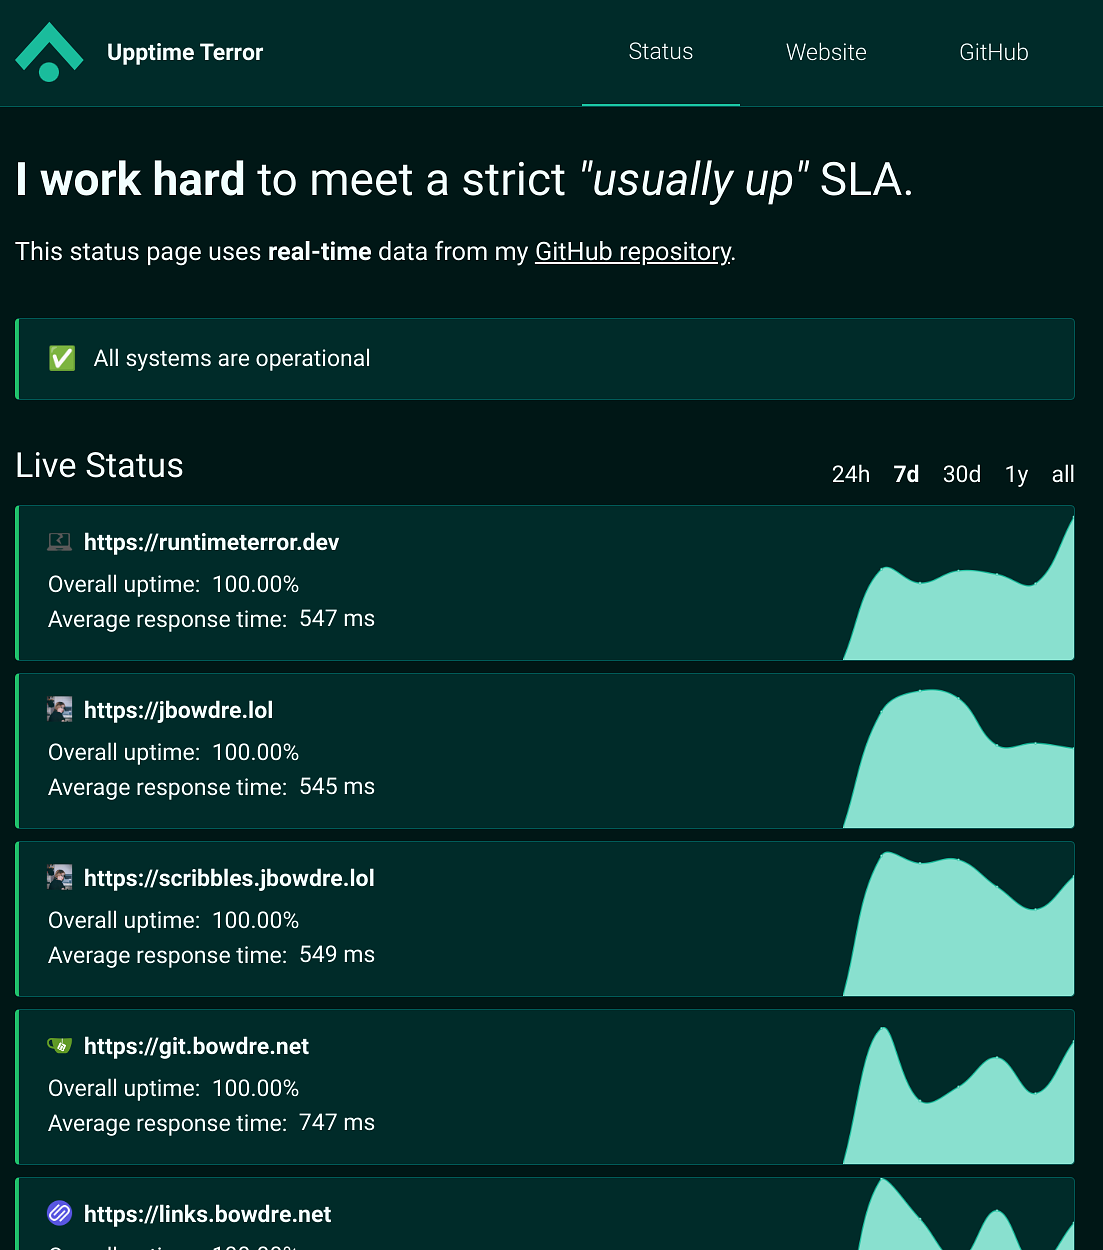 Green-themed website status page displaying real-time data from a GitHub repository. It shows a 100% uptime for various services with average response times ranging from 545 ms to 747 ms.